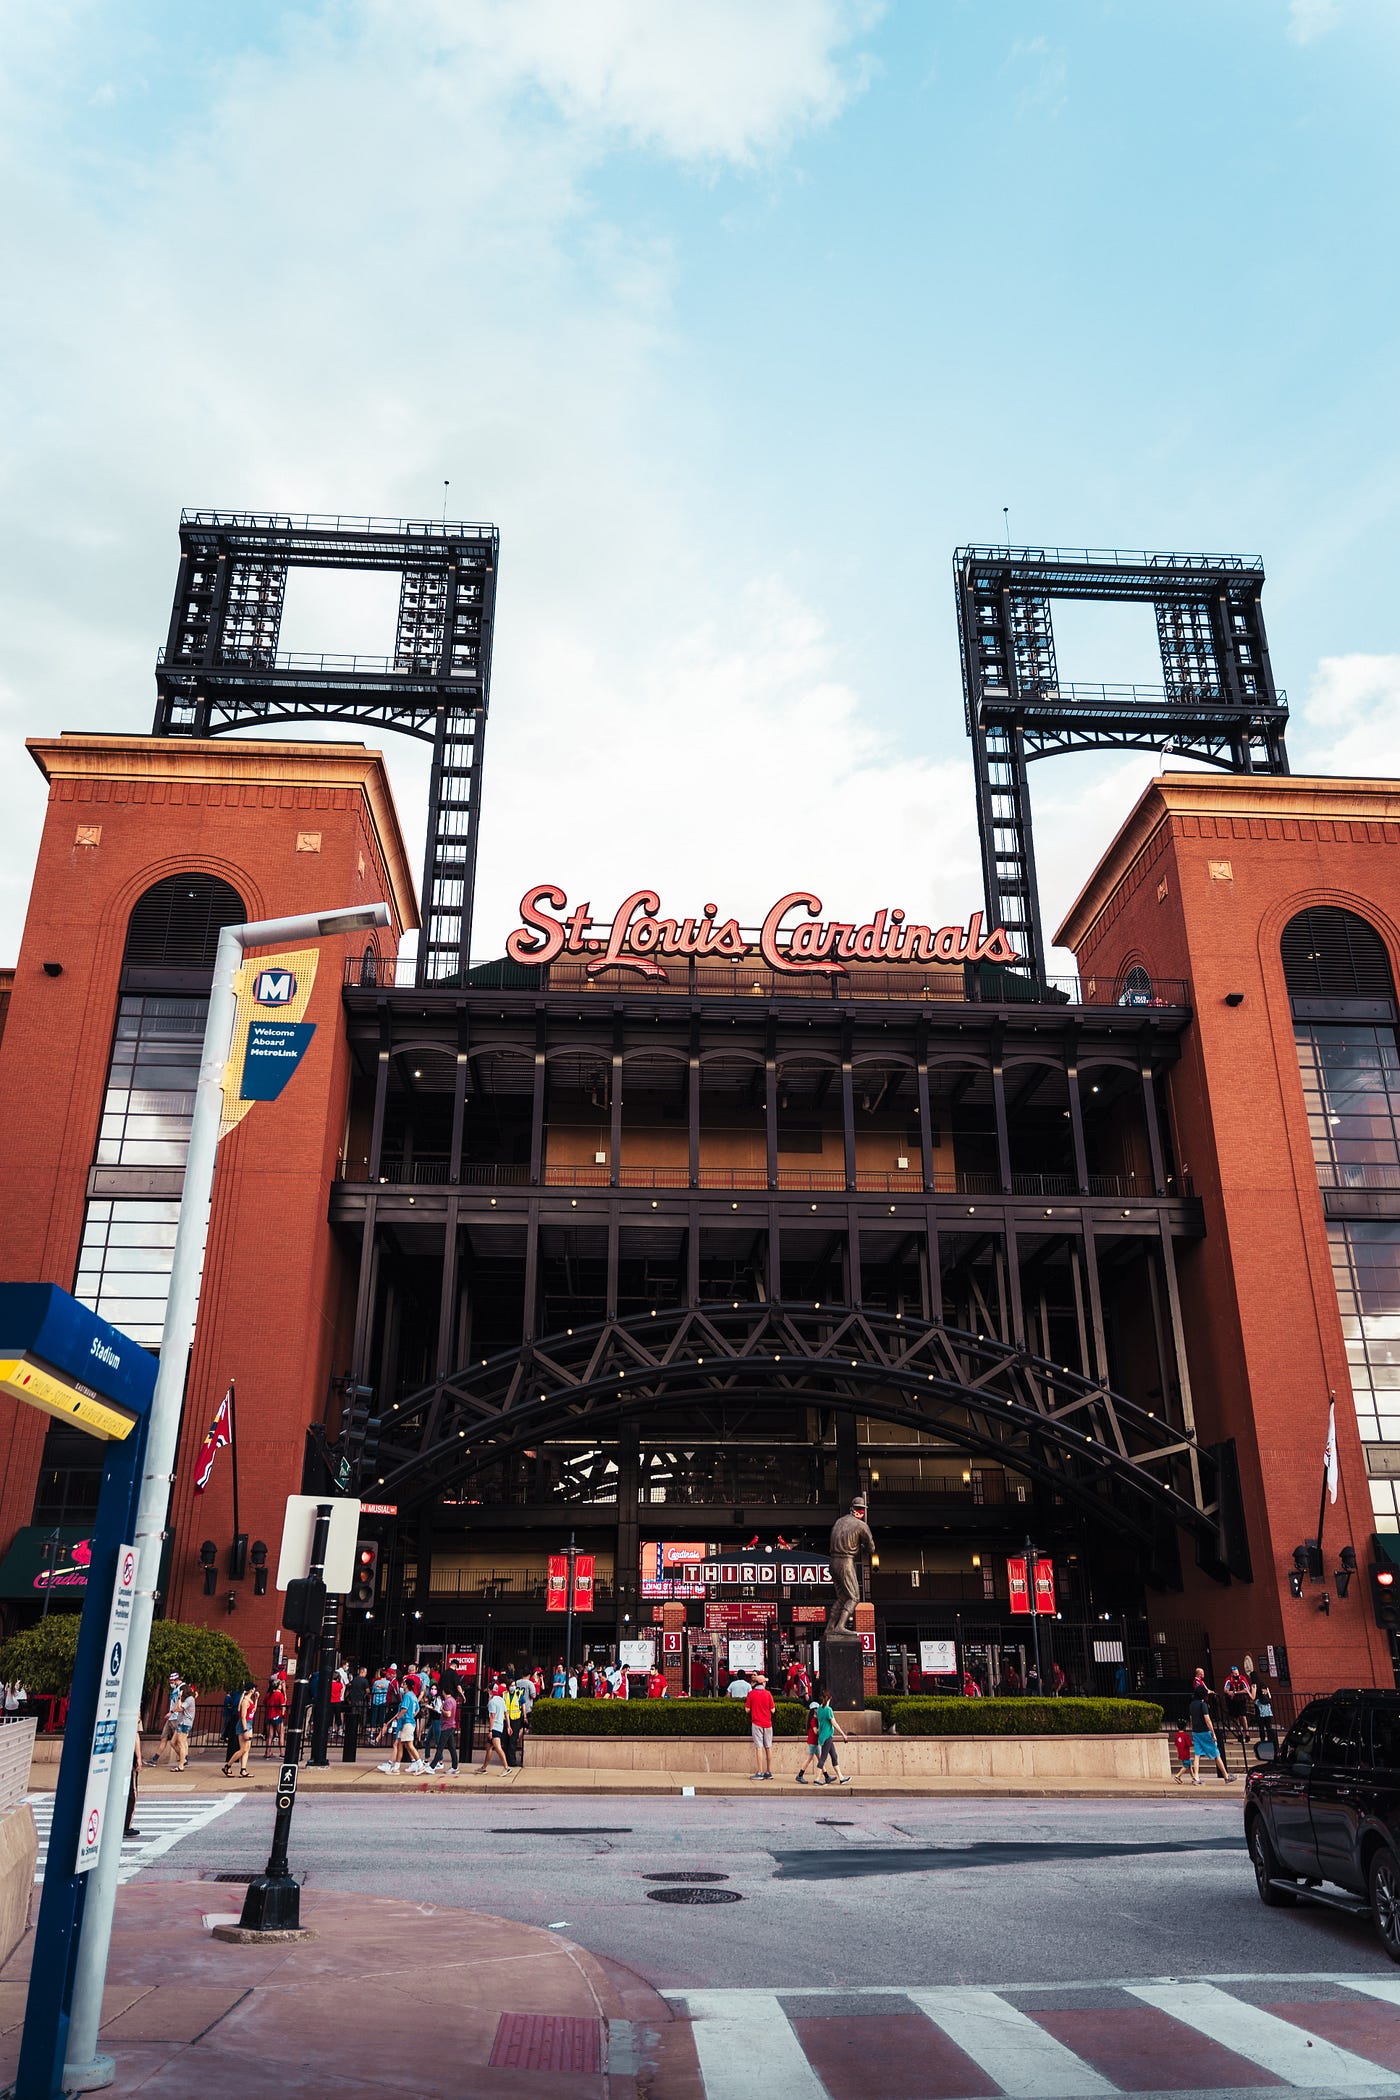 St. Louis Cardinals 2022 Opening Day Details